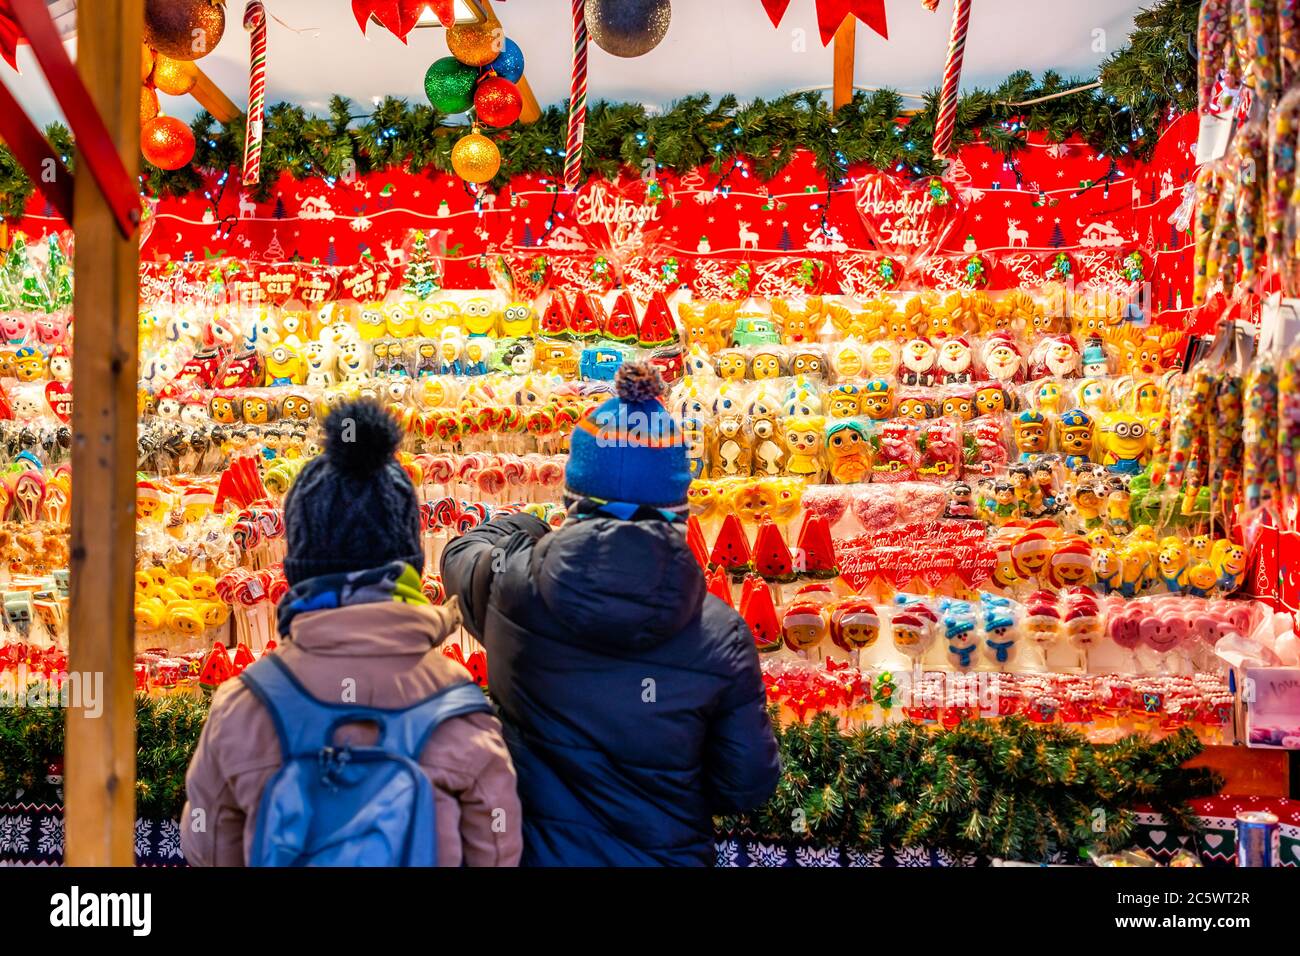 Warsaw, Poland - December 19, 2019: Old town Warszawa Christmas market selling candy sweets and young children kids people shopping wanting food Stock Photo